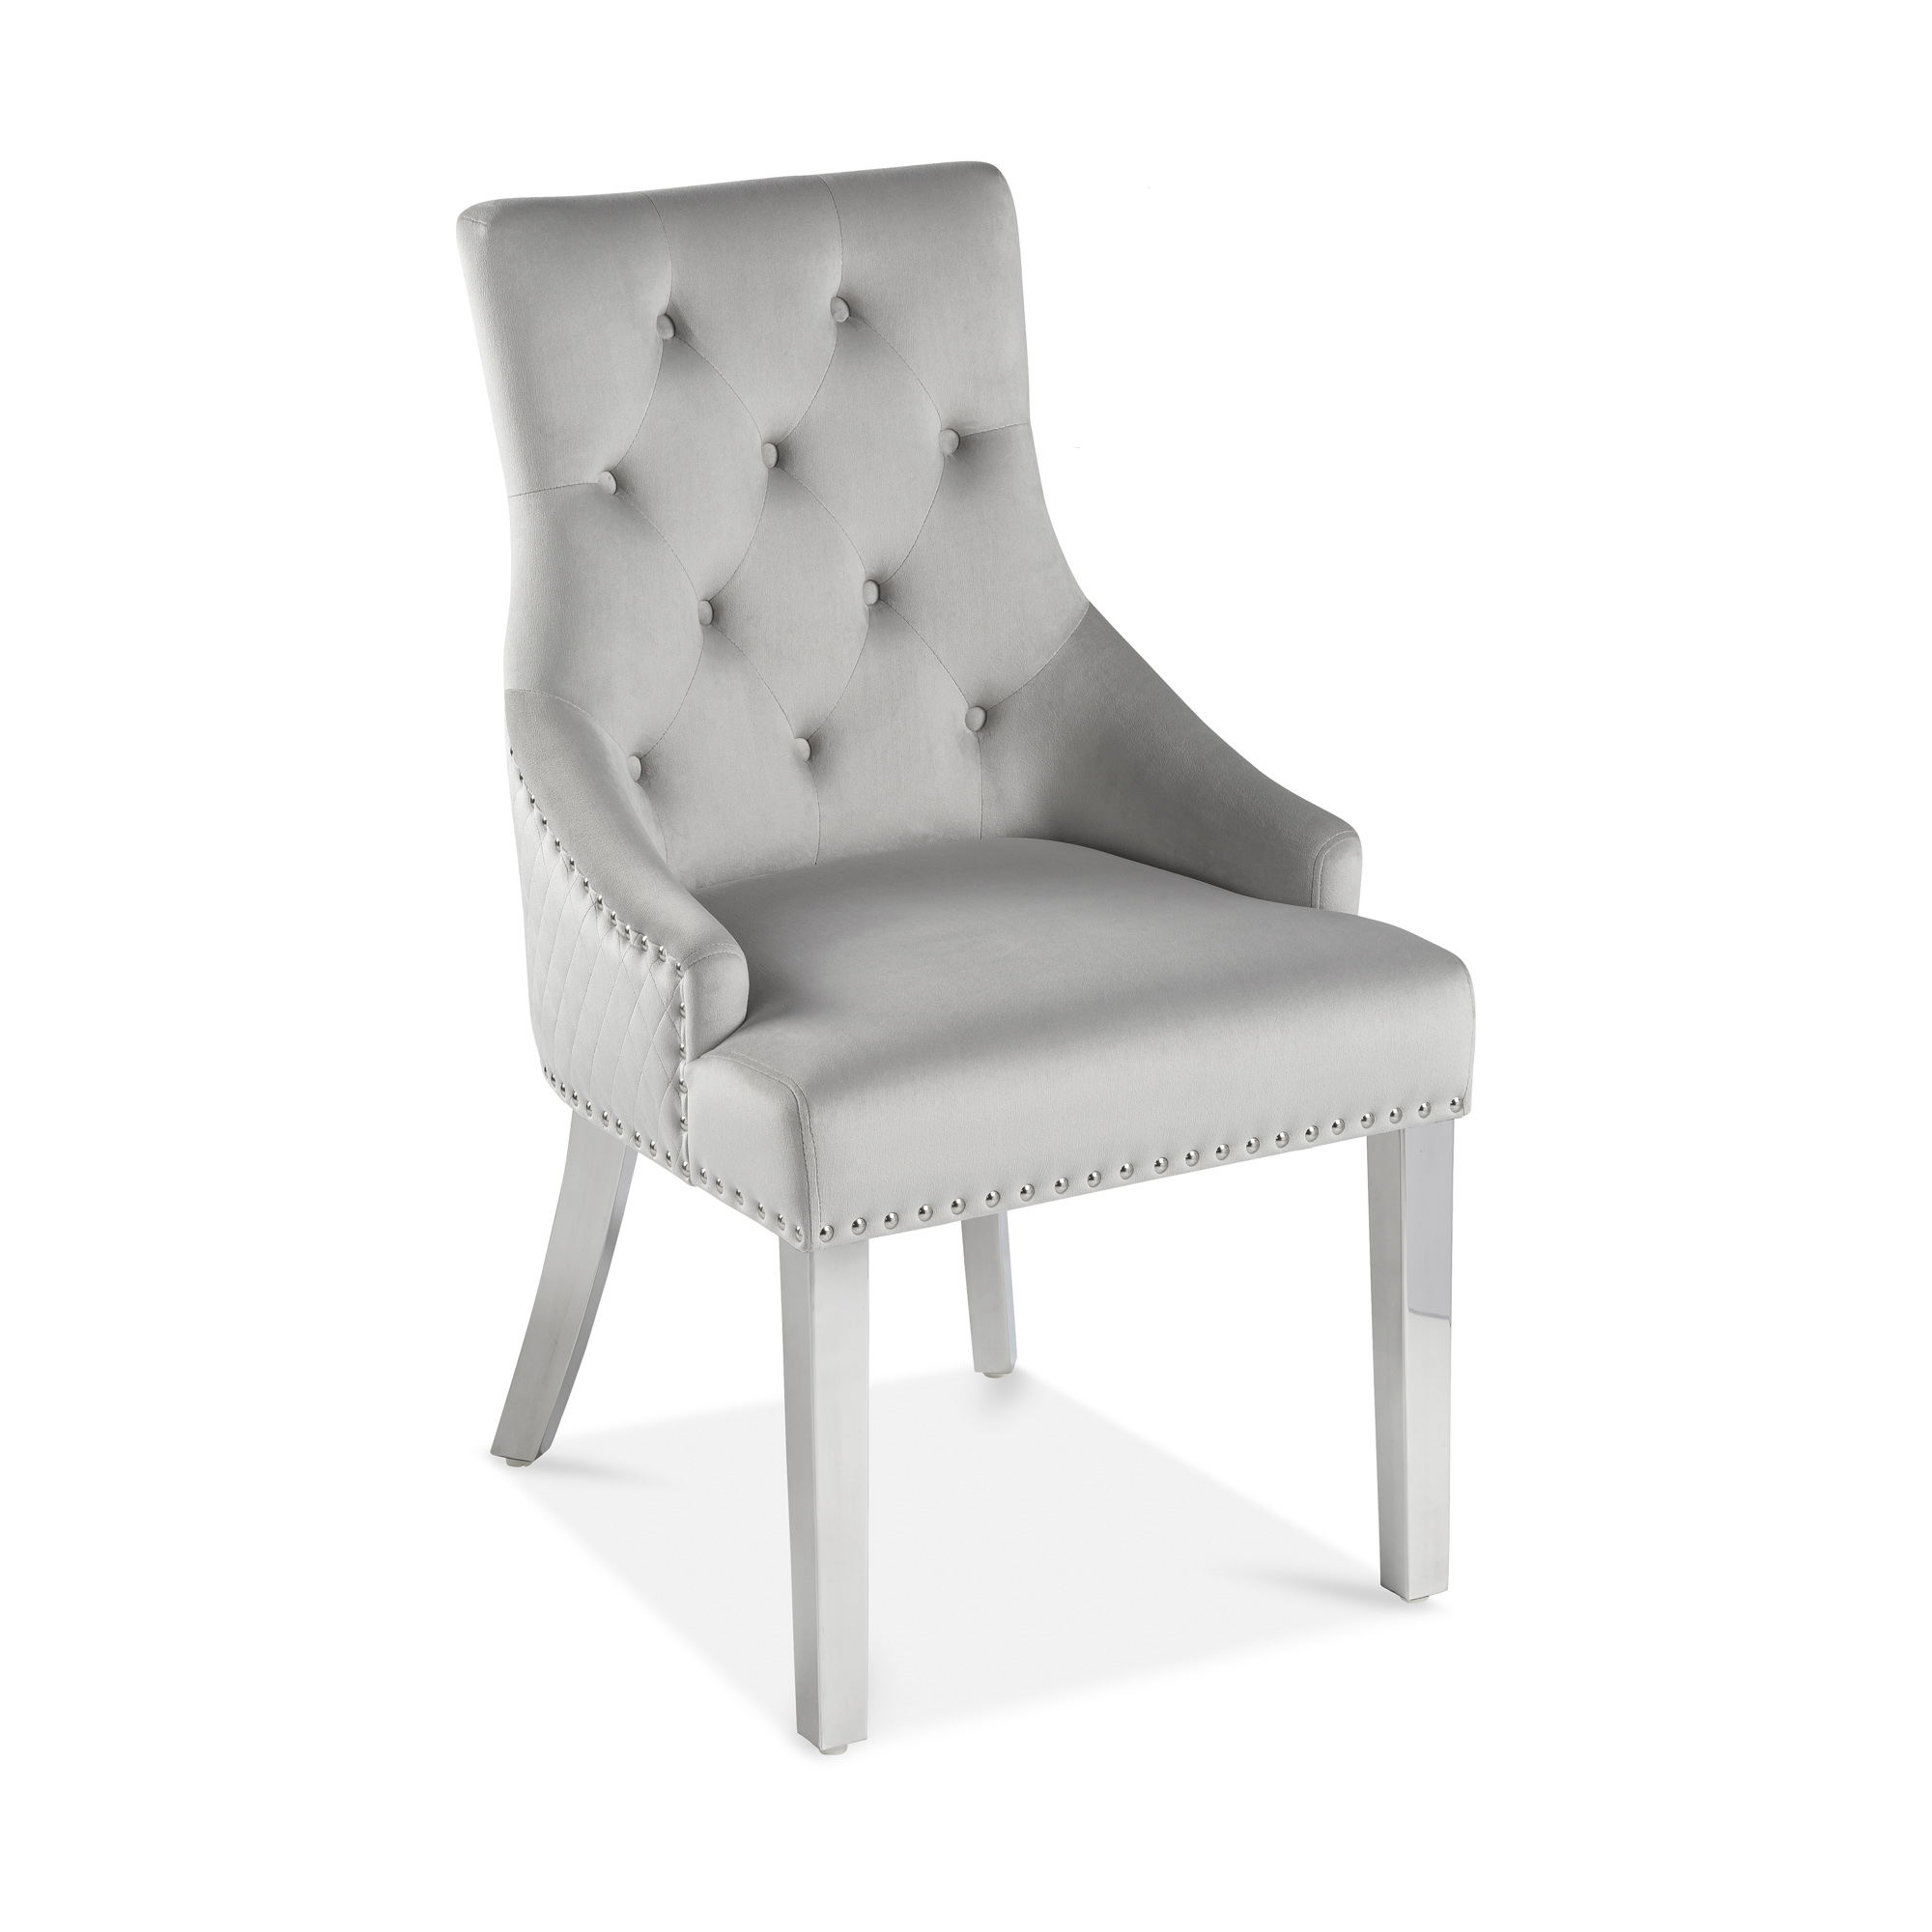 Luxury Dining Room Chairs For, Grey Velvet Dining Chairs Set Of 4